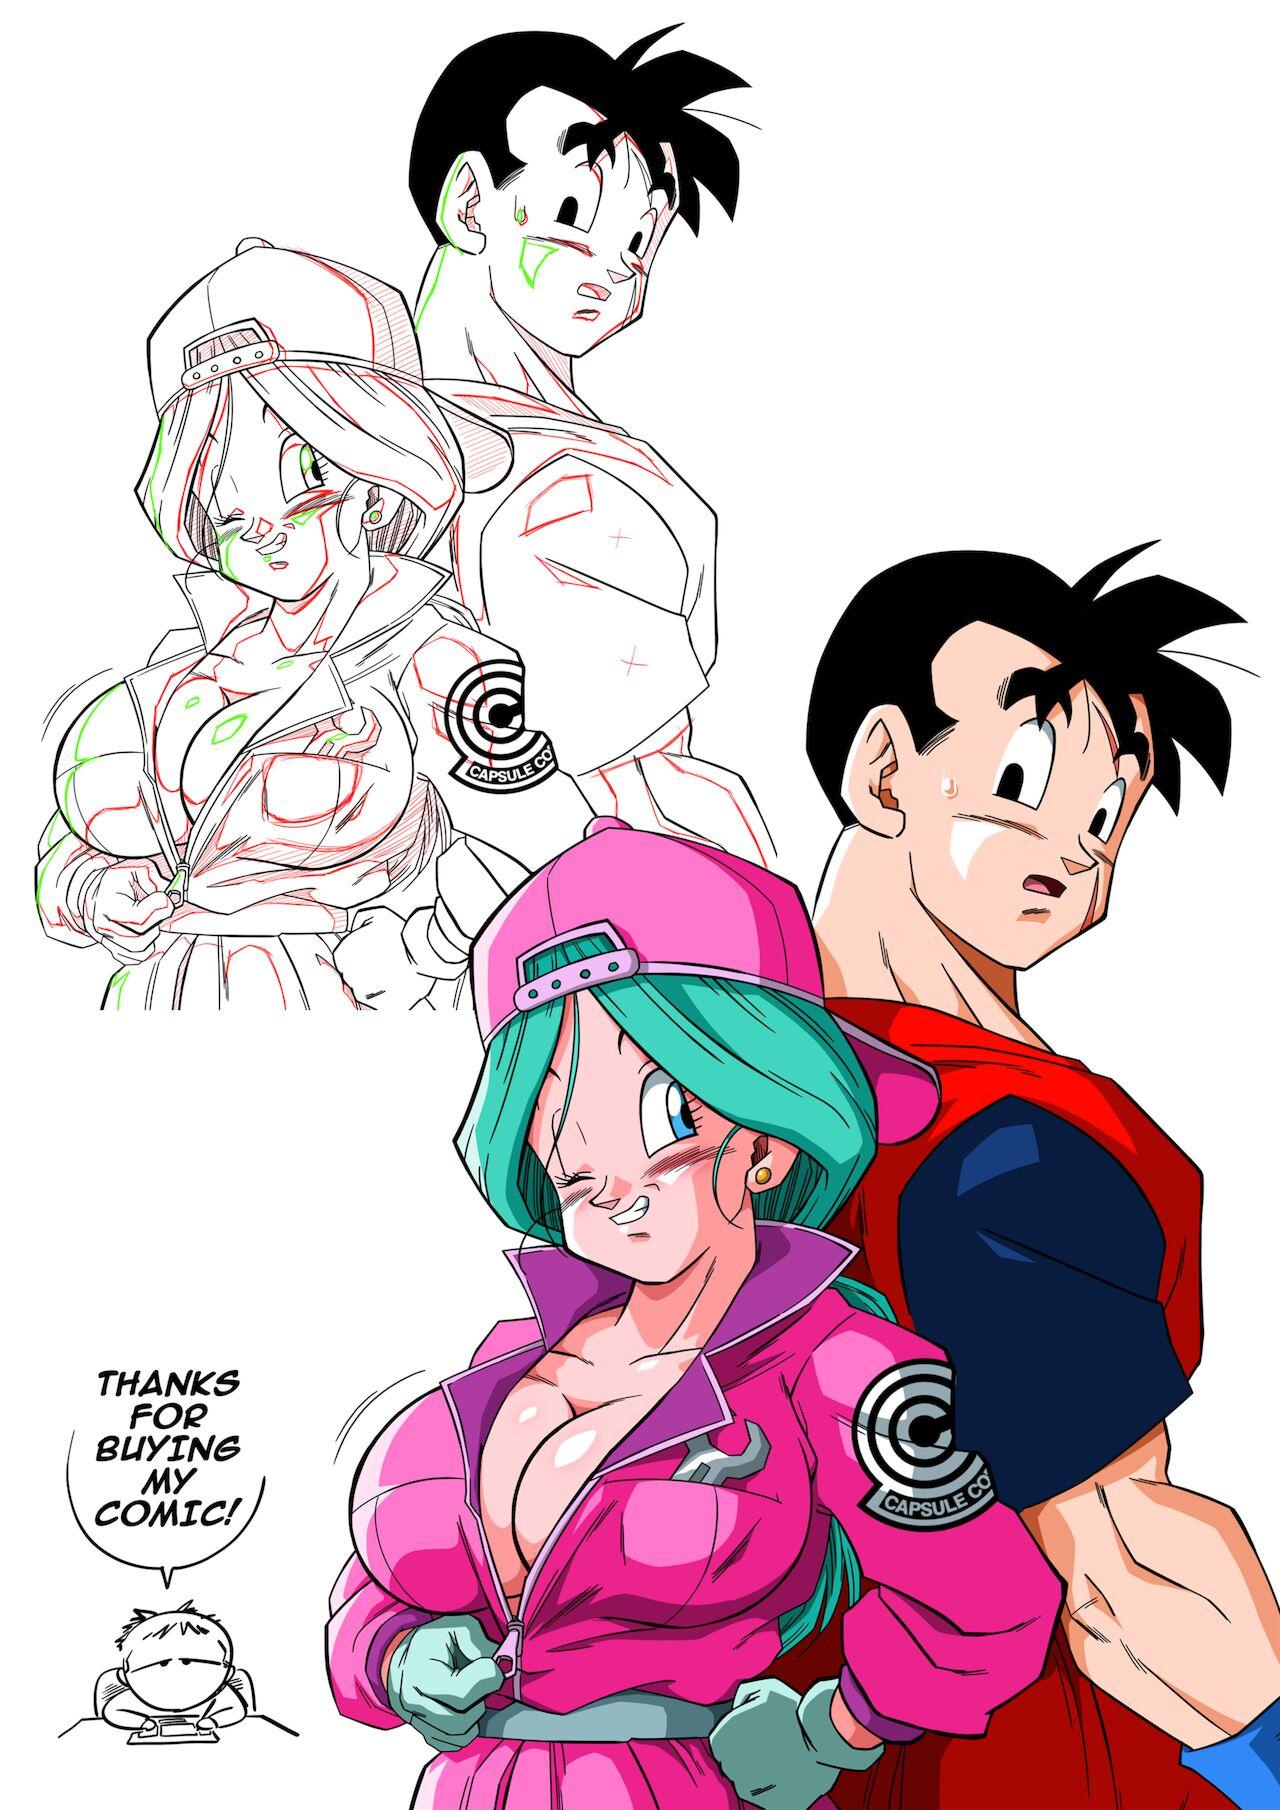 Lost of sex in this Future! - BULMA and GOHAN 17